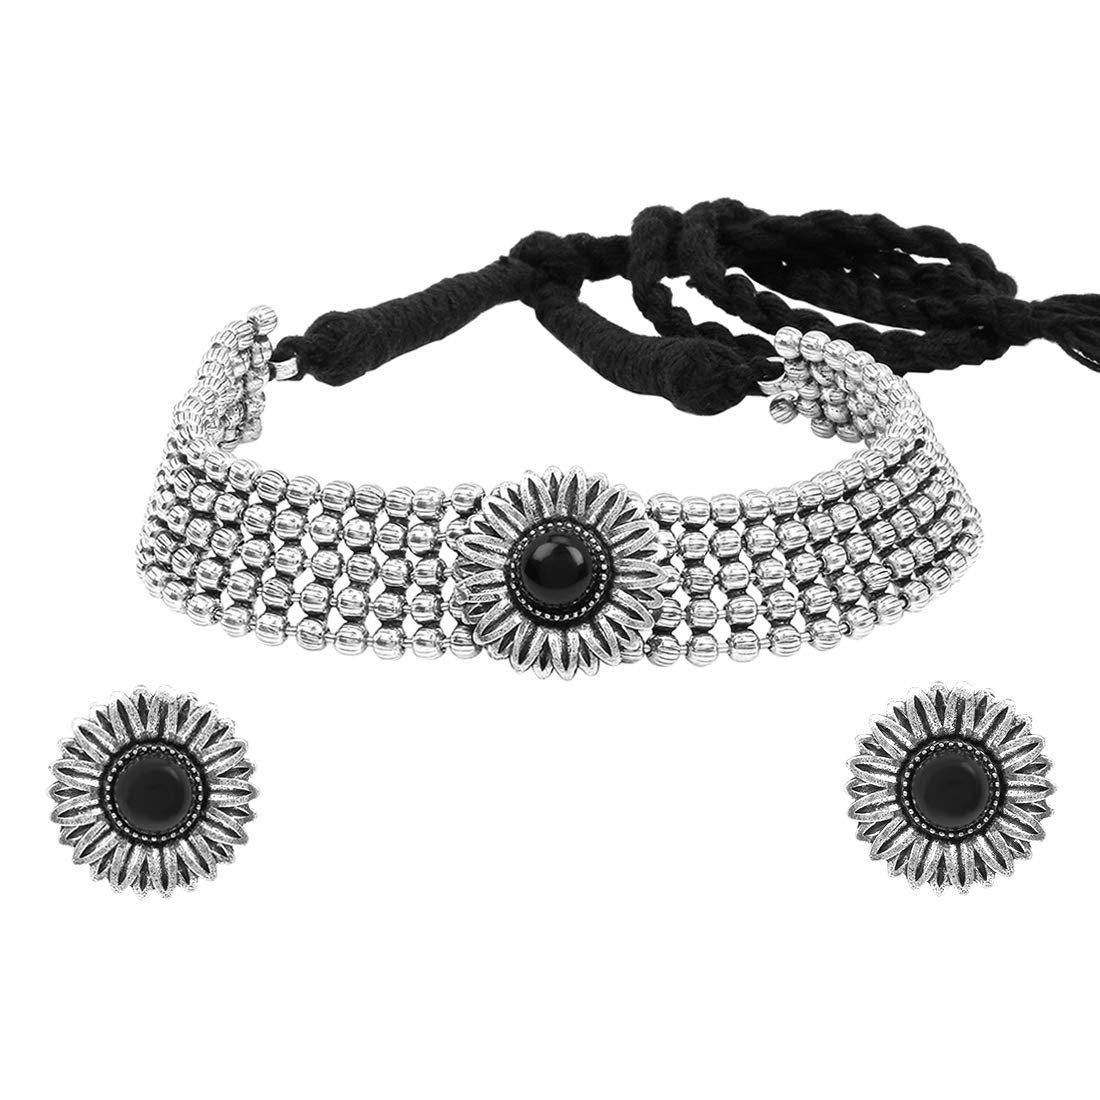 Yellow Chimes Classic German Silver Oxidised Jewellery Set Designer Floral Crafted Traditional Choker Necklace Set by Yellow Chimes Jewellery Set for Women (Oxidized Silver,black) (YCTJNS-OXDCIRCHK-BK)